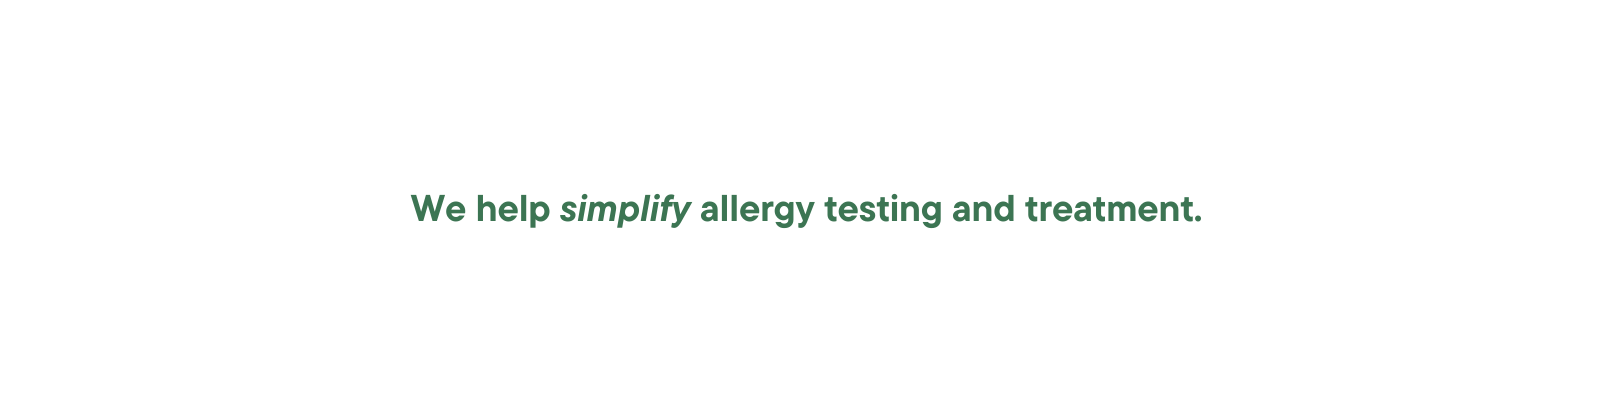 We help simplify allergy testing and treatment